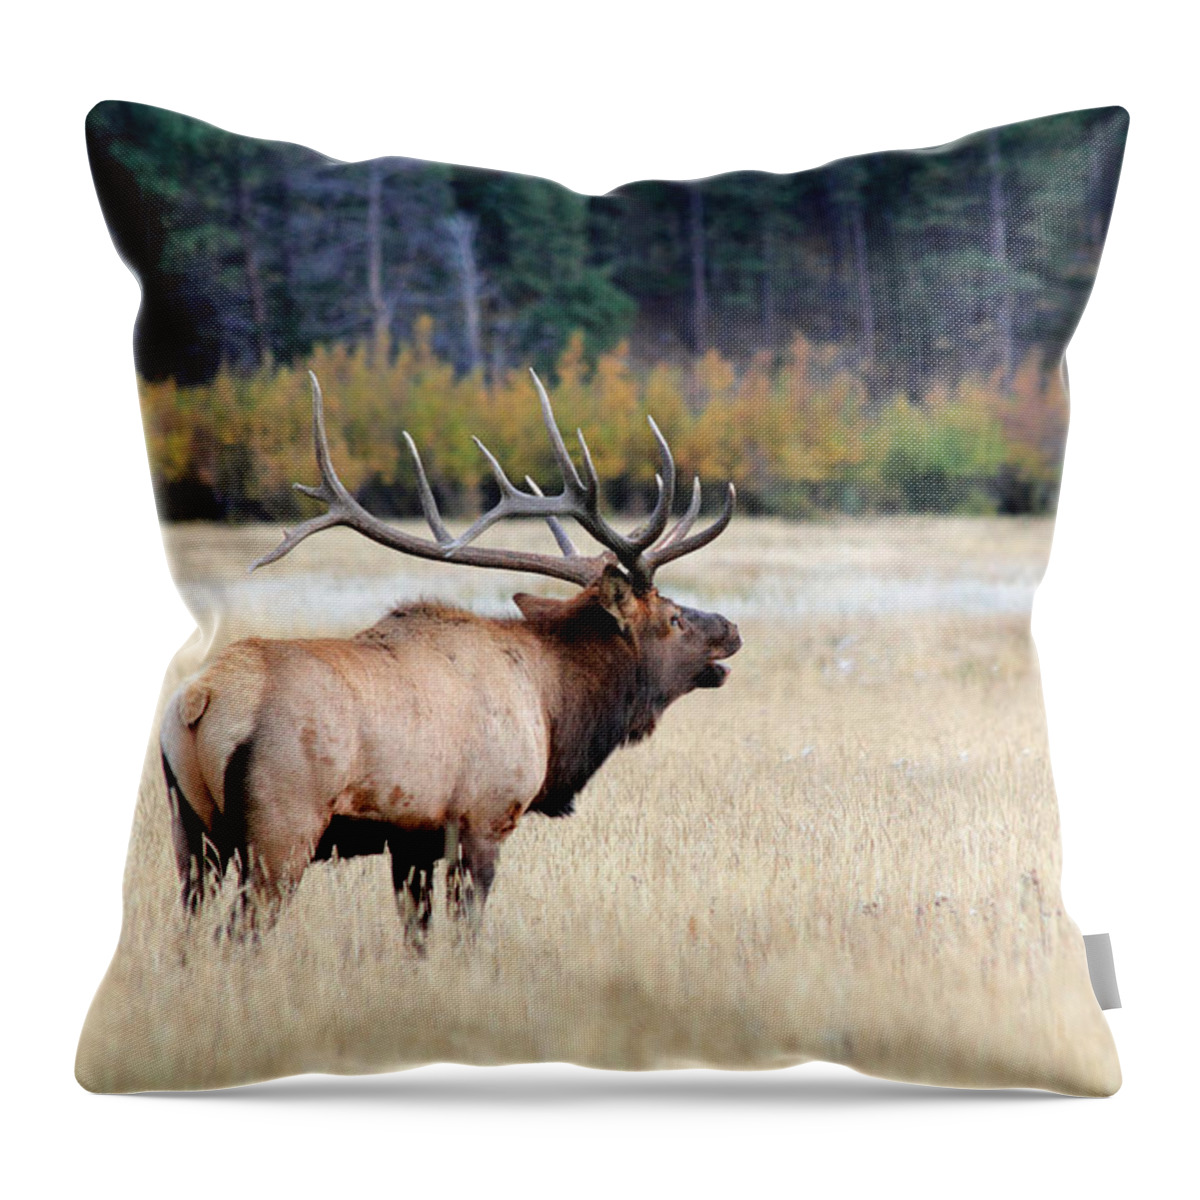 Bull Throw Pillow featuring the photograph Big Colorado Bull by Shane Bechler